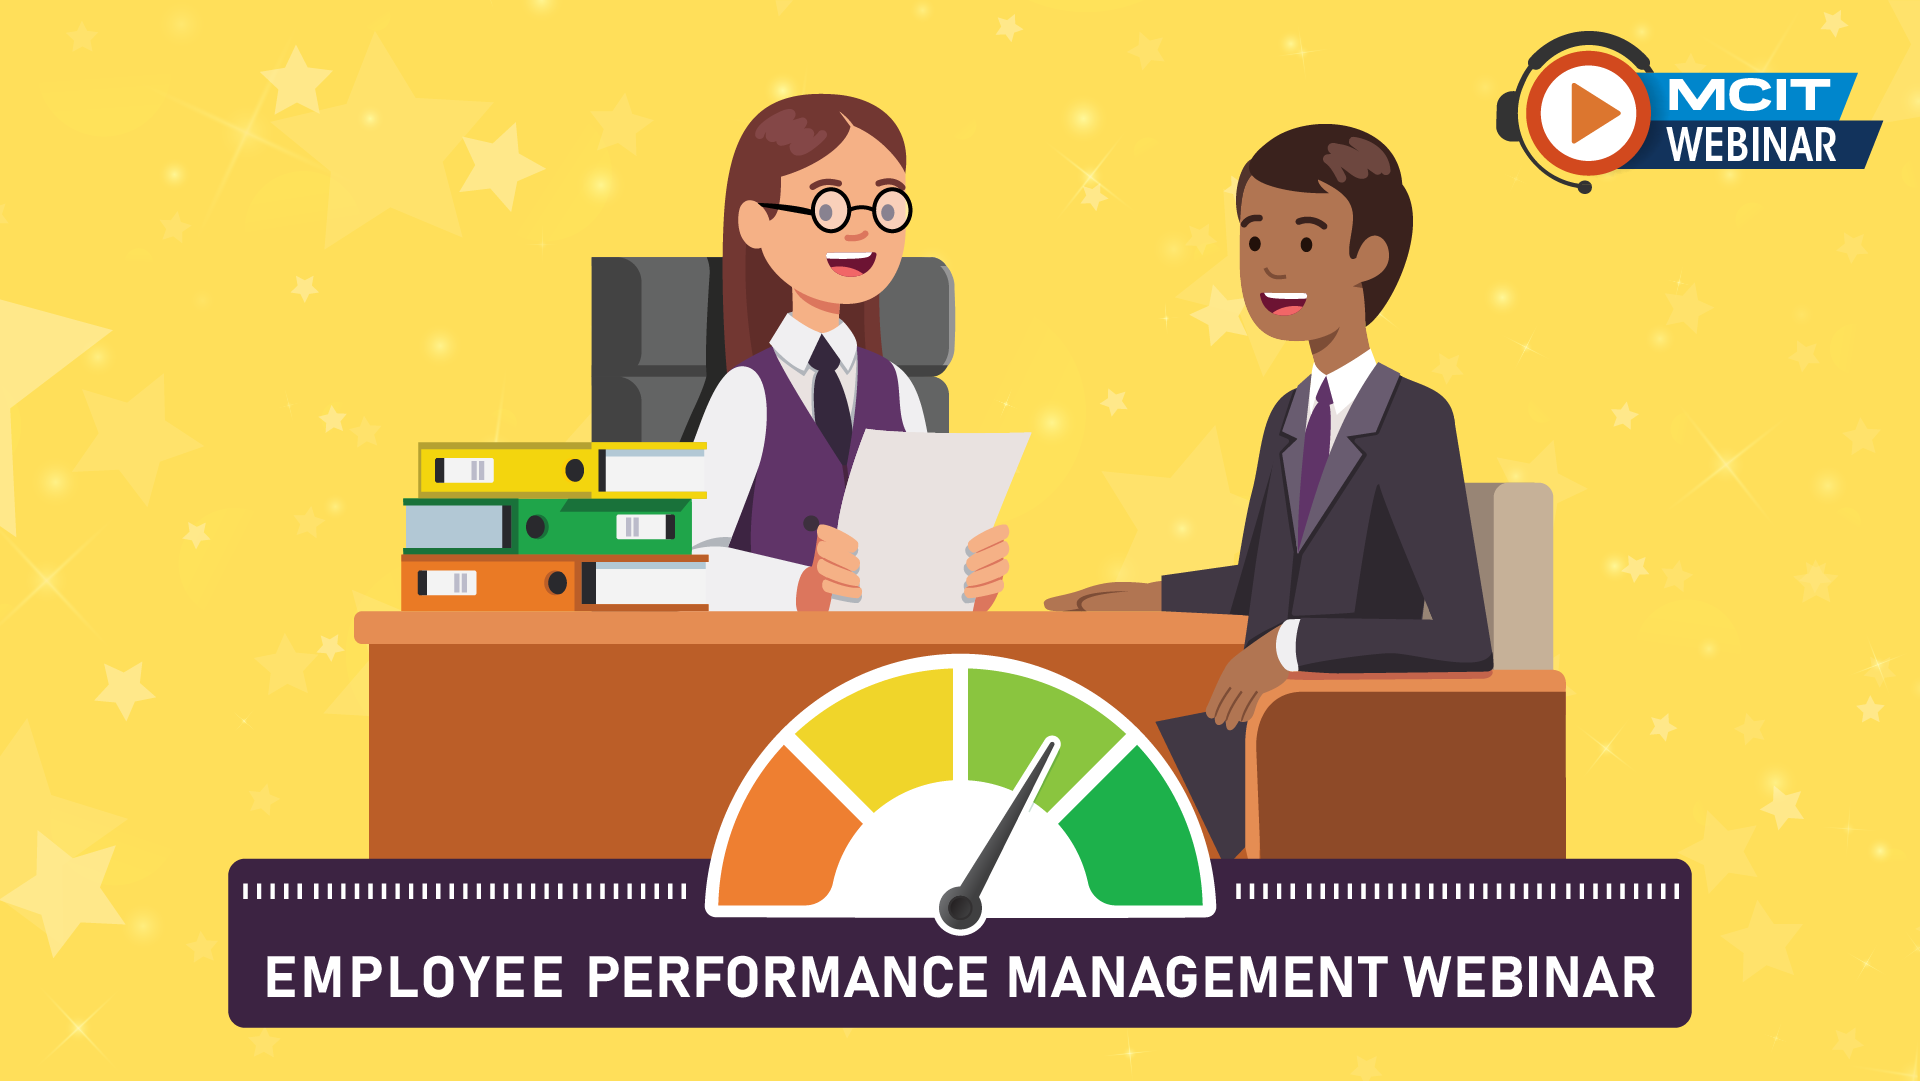 Manager giving employee positive review. Yellow background with stars. Color dial pointing at green. Employee Performance Management Webinar - MCIT Webinar